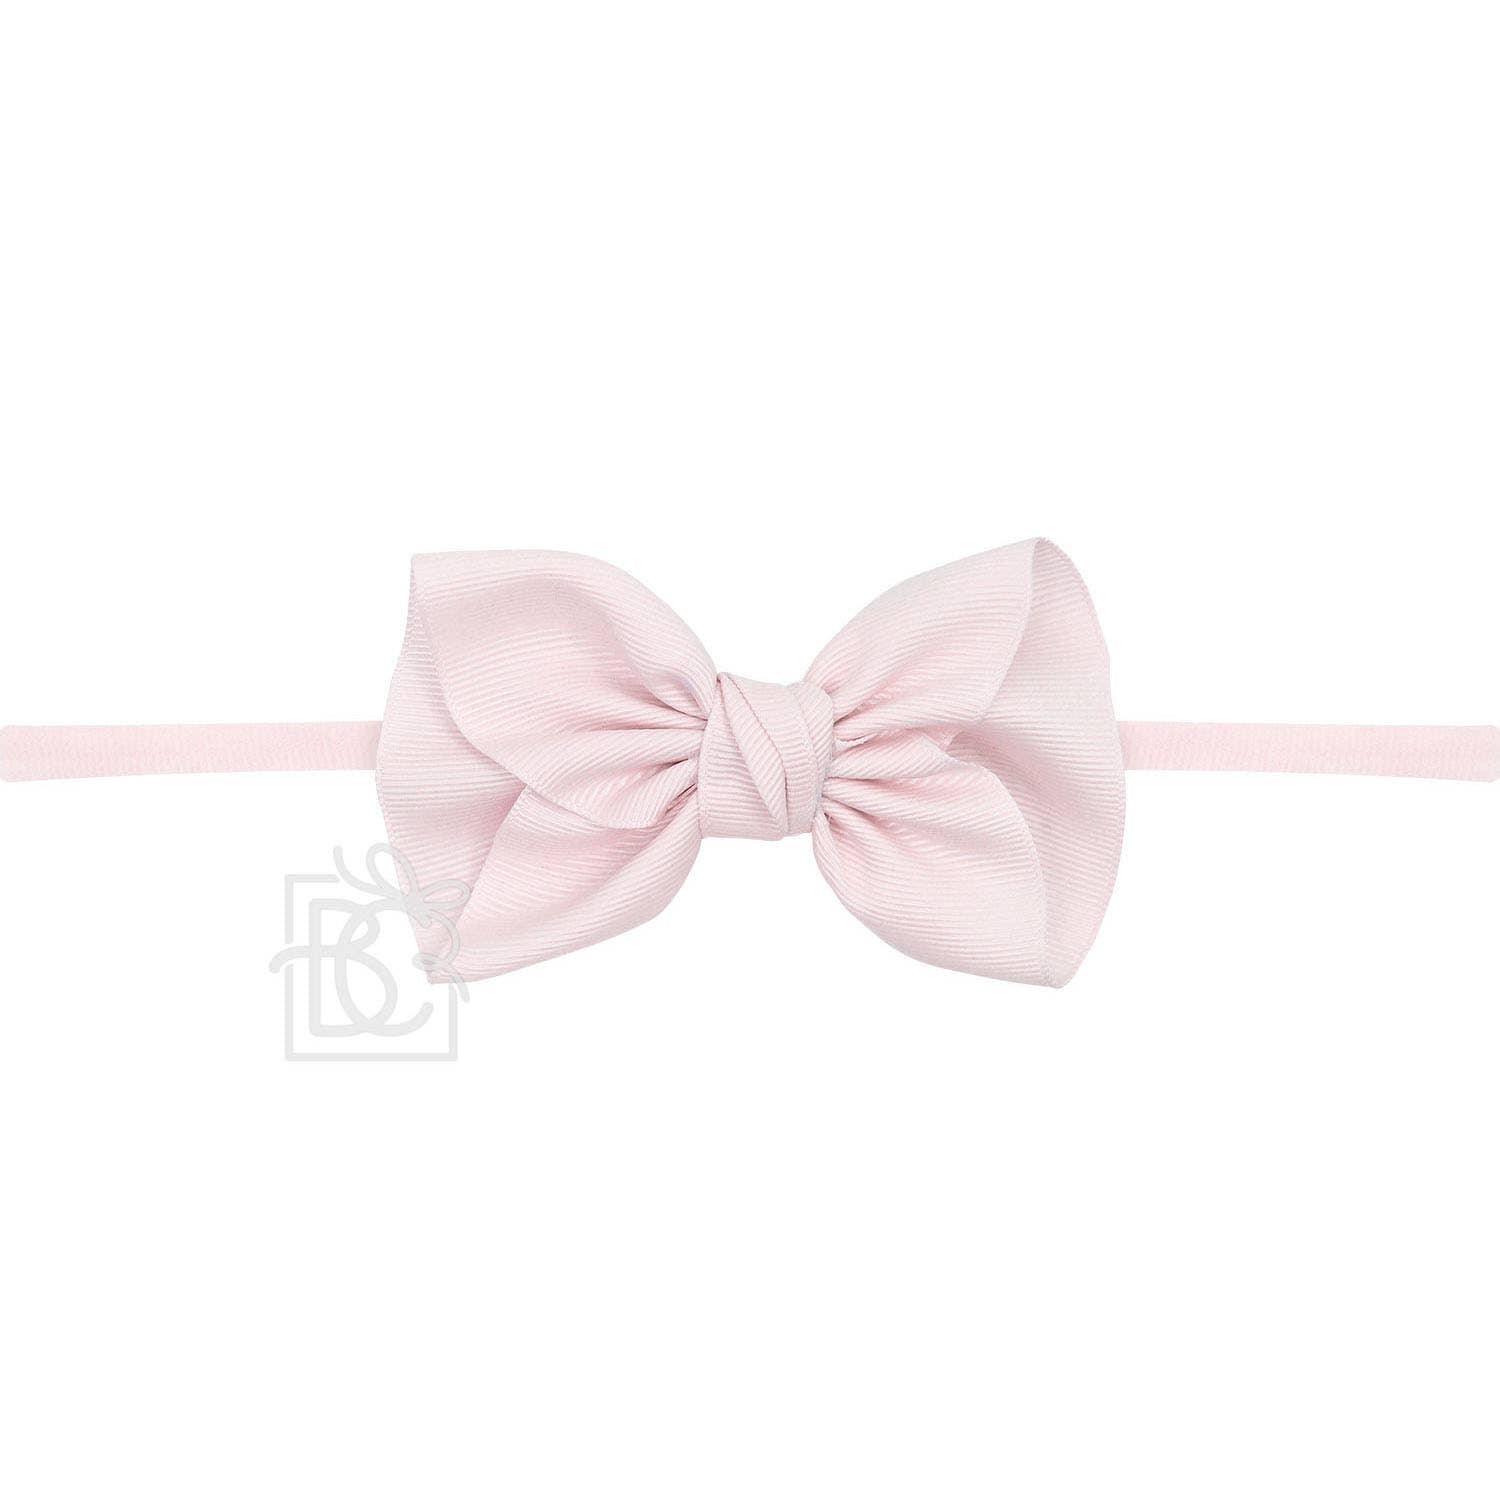 Anne Light Pink Headband with Grosgrain Bow